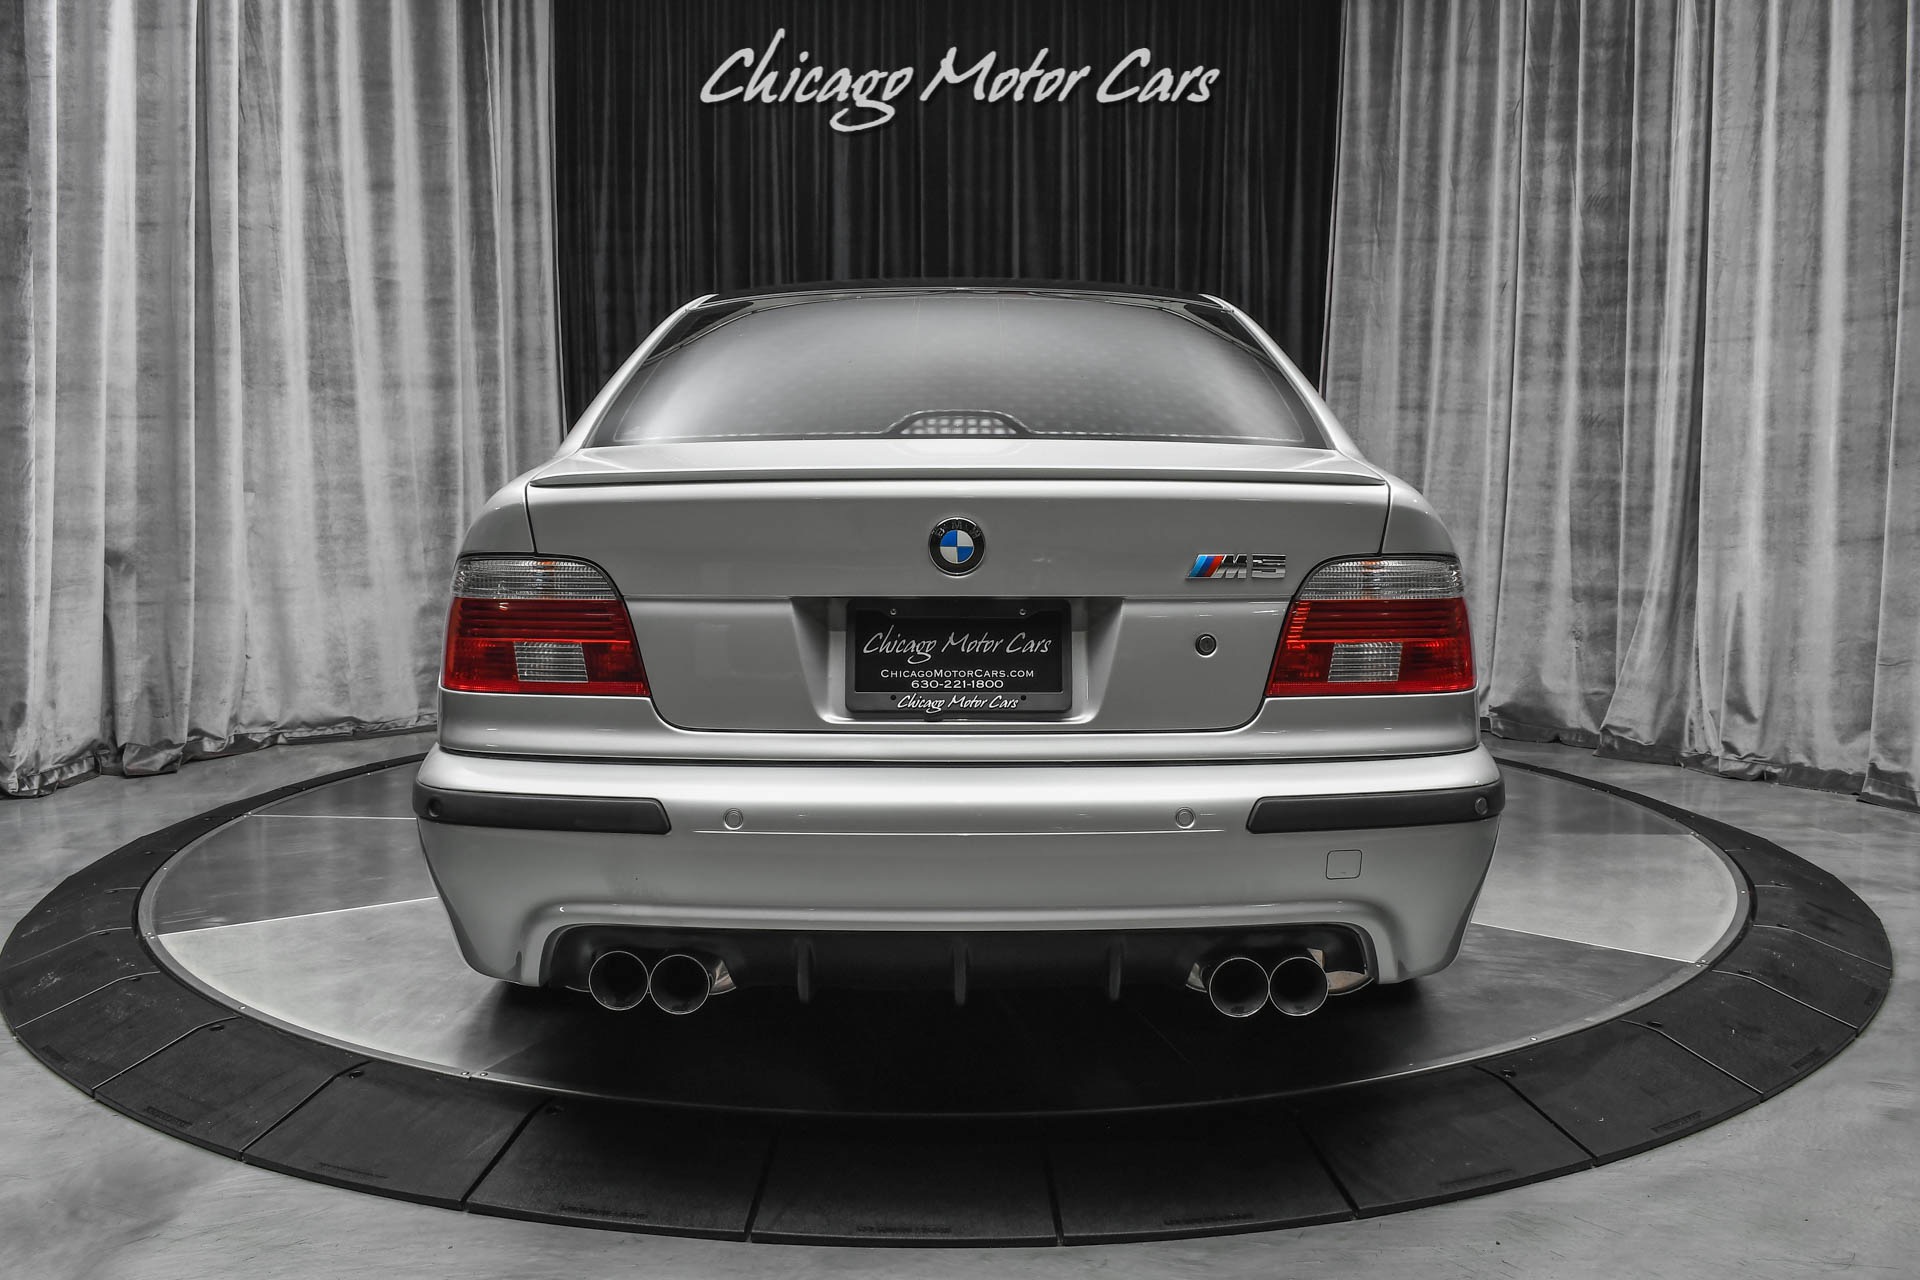 2008 BMW M5 Start Up, Exhaust, and In Depth Tour 